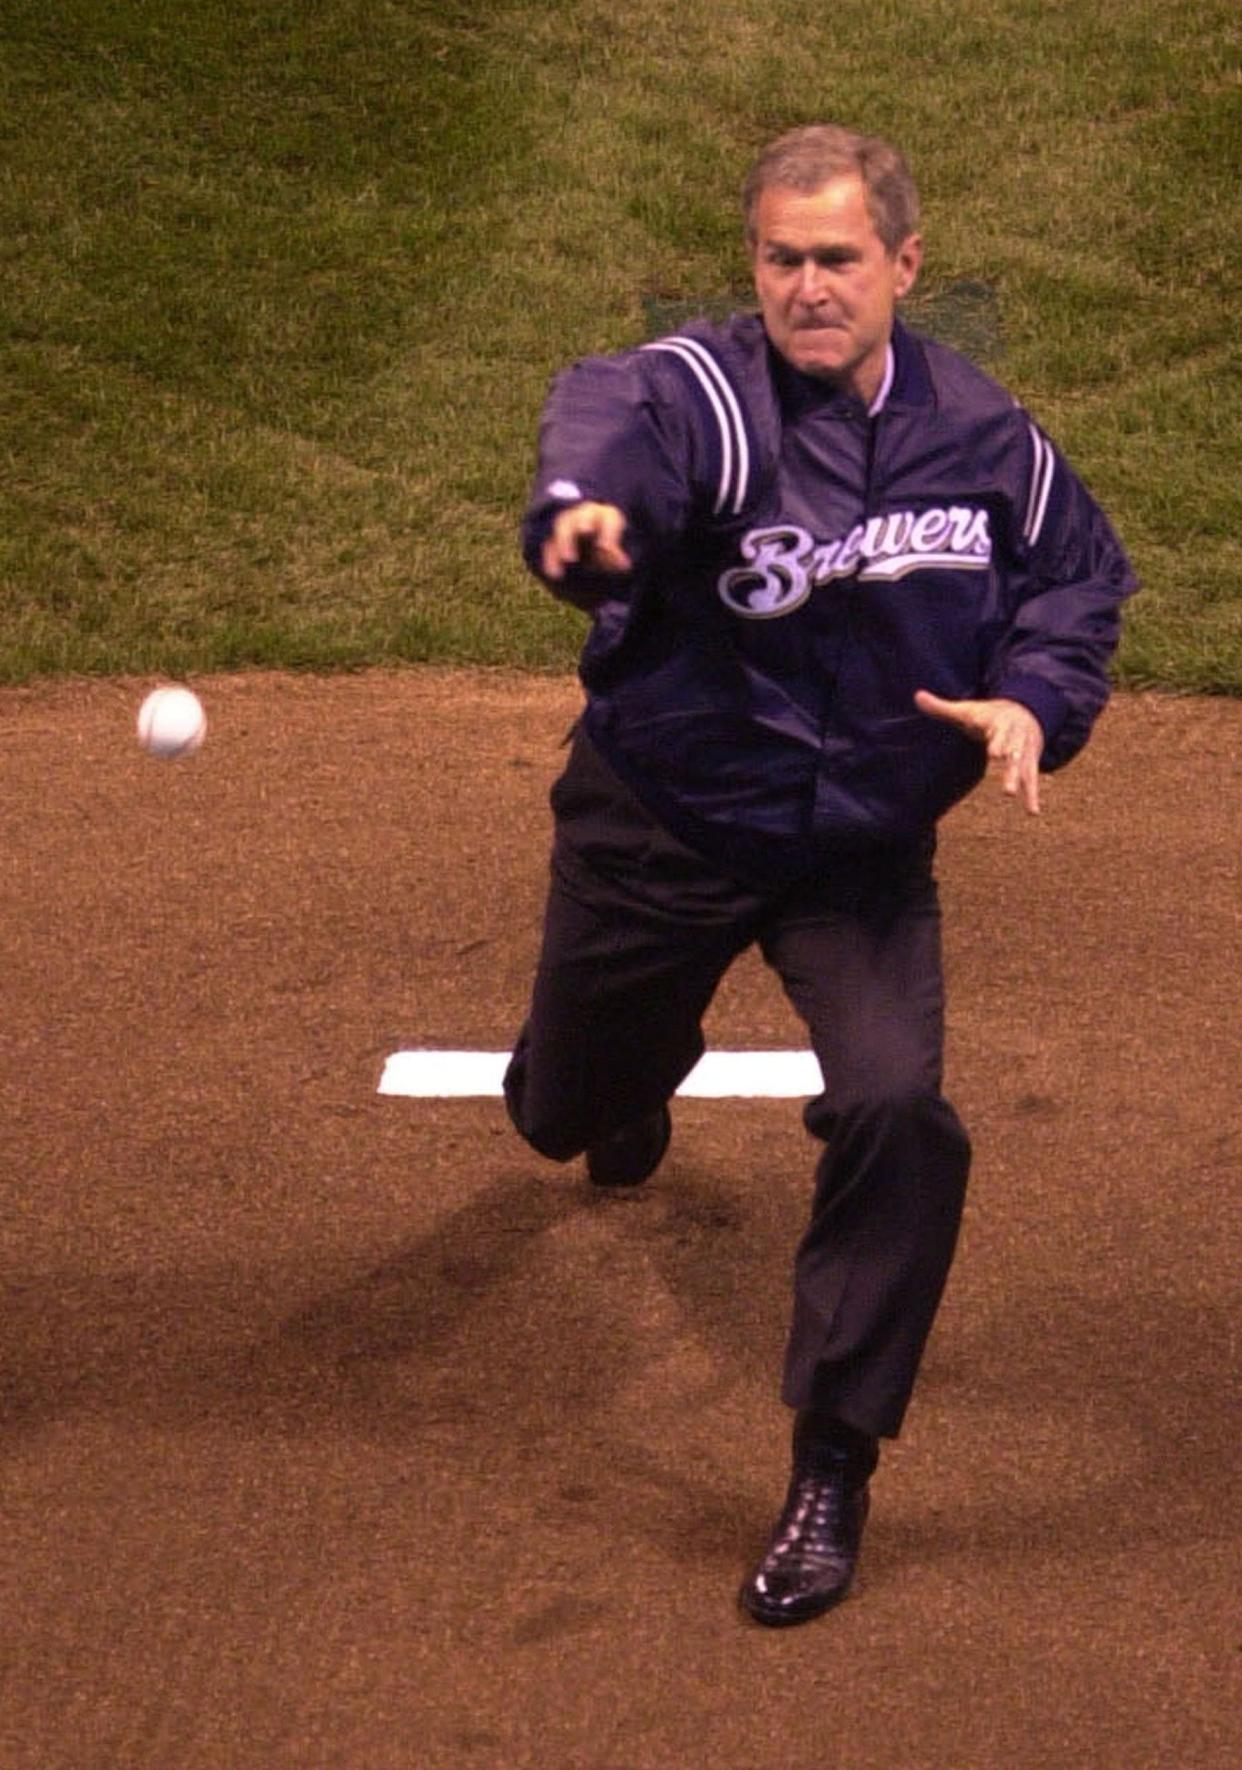 President George W. Bush throws out the first pitch at Miller Park in Milwaukee on April 6, 2001. The pitch fell short of home plate.